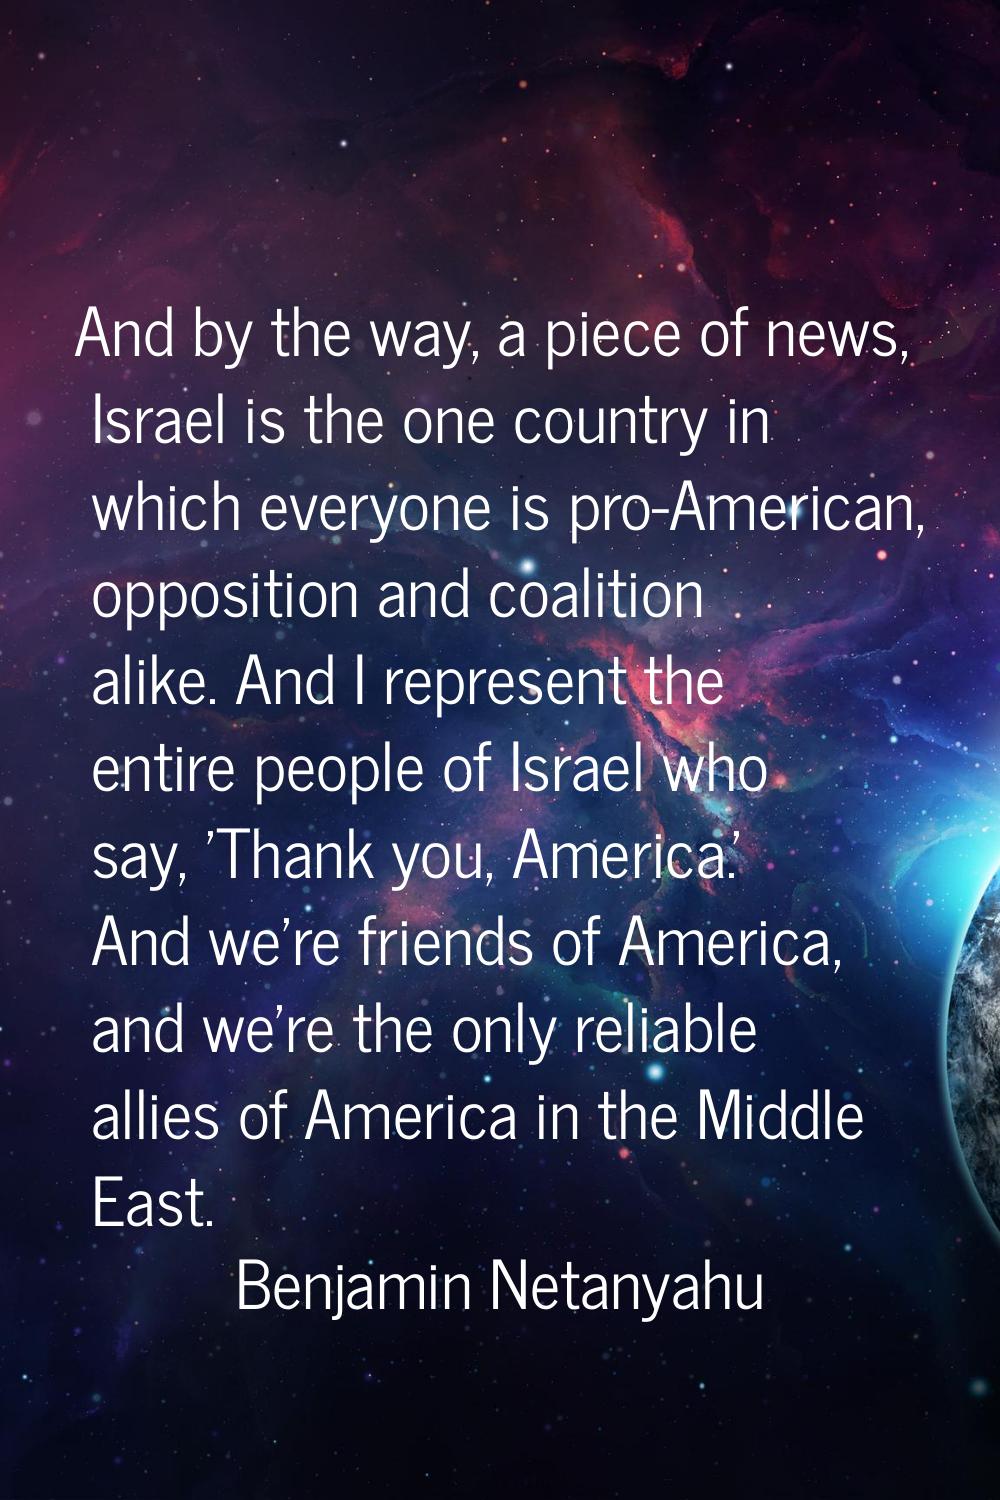 And by the way, a piece of news, Israel is the one country in which everyone is pro-American, oppos